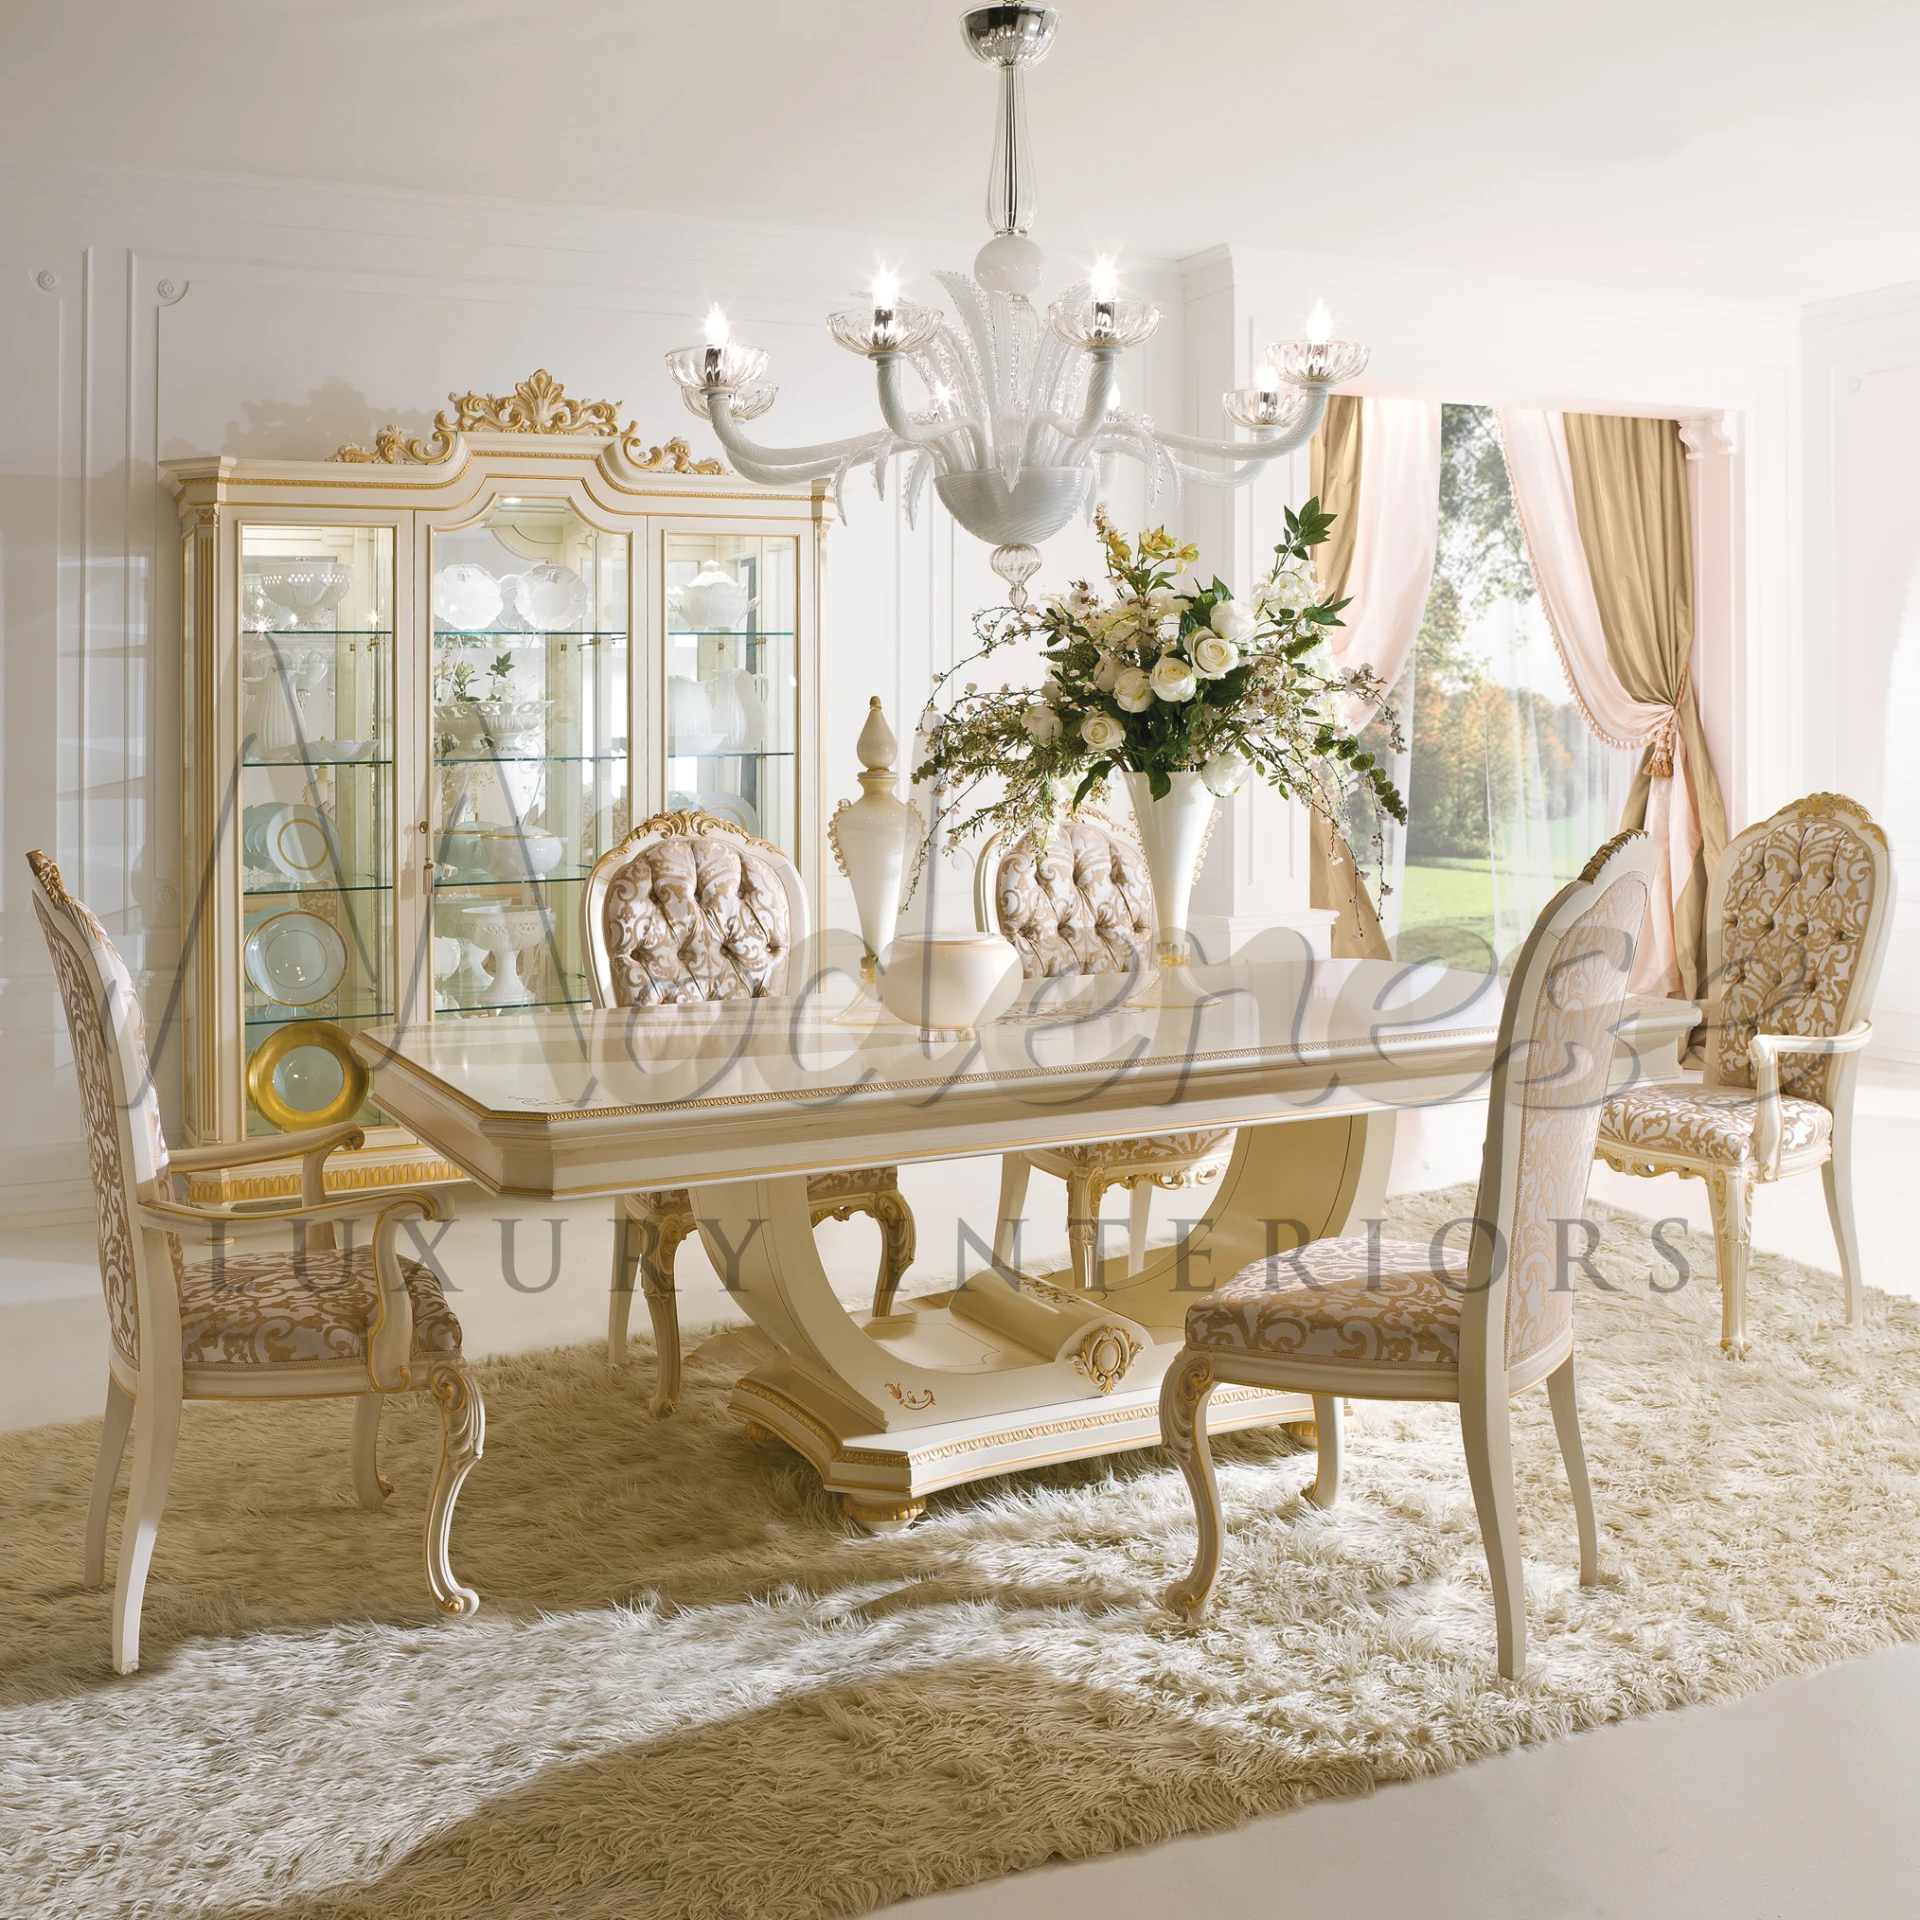 Stylish dining space with detailed furniture and strong natural light.